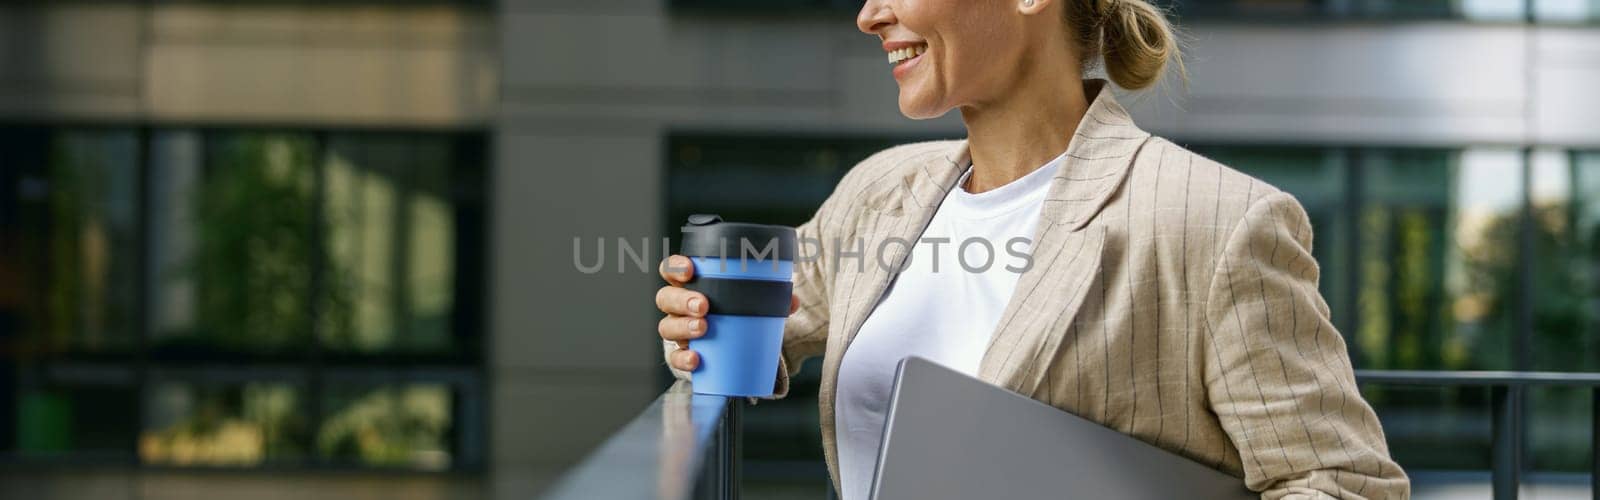 Woman freelancer standing with laptop and coffee cup on modern building background during break time